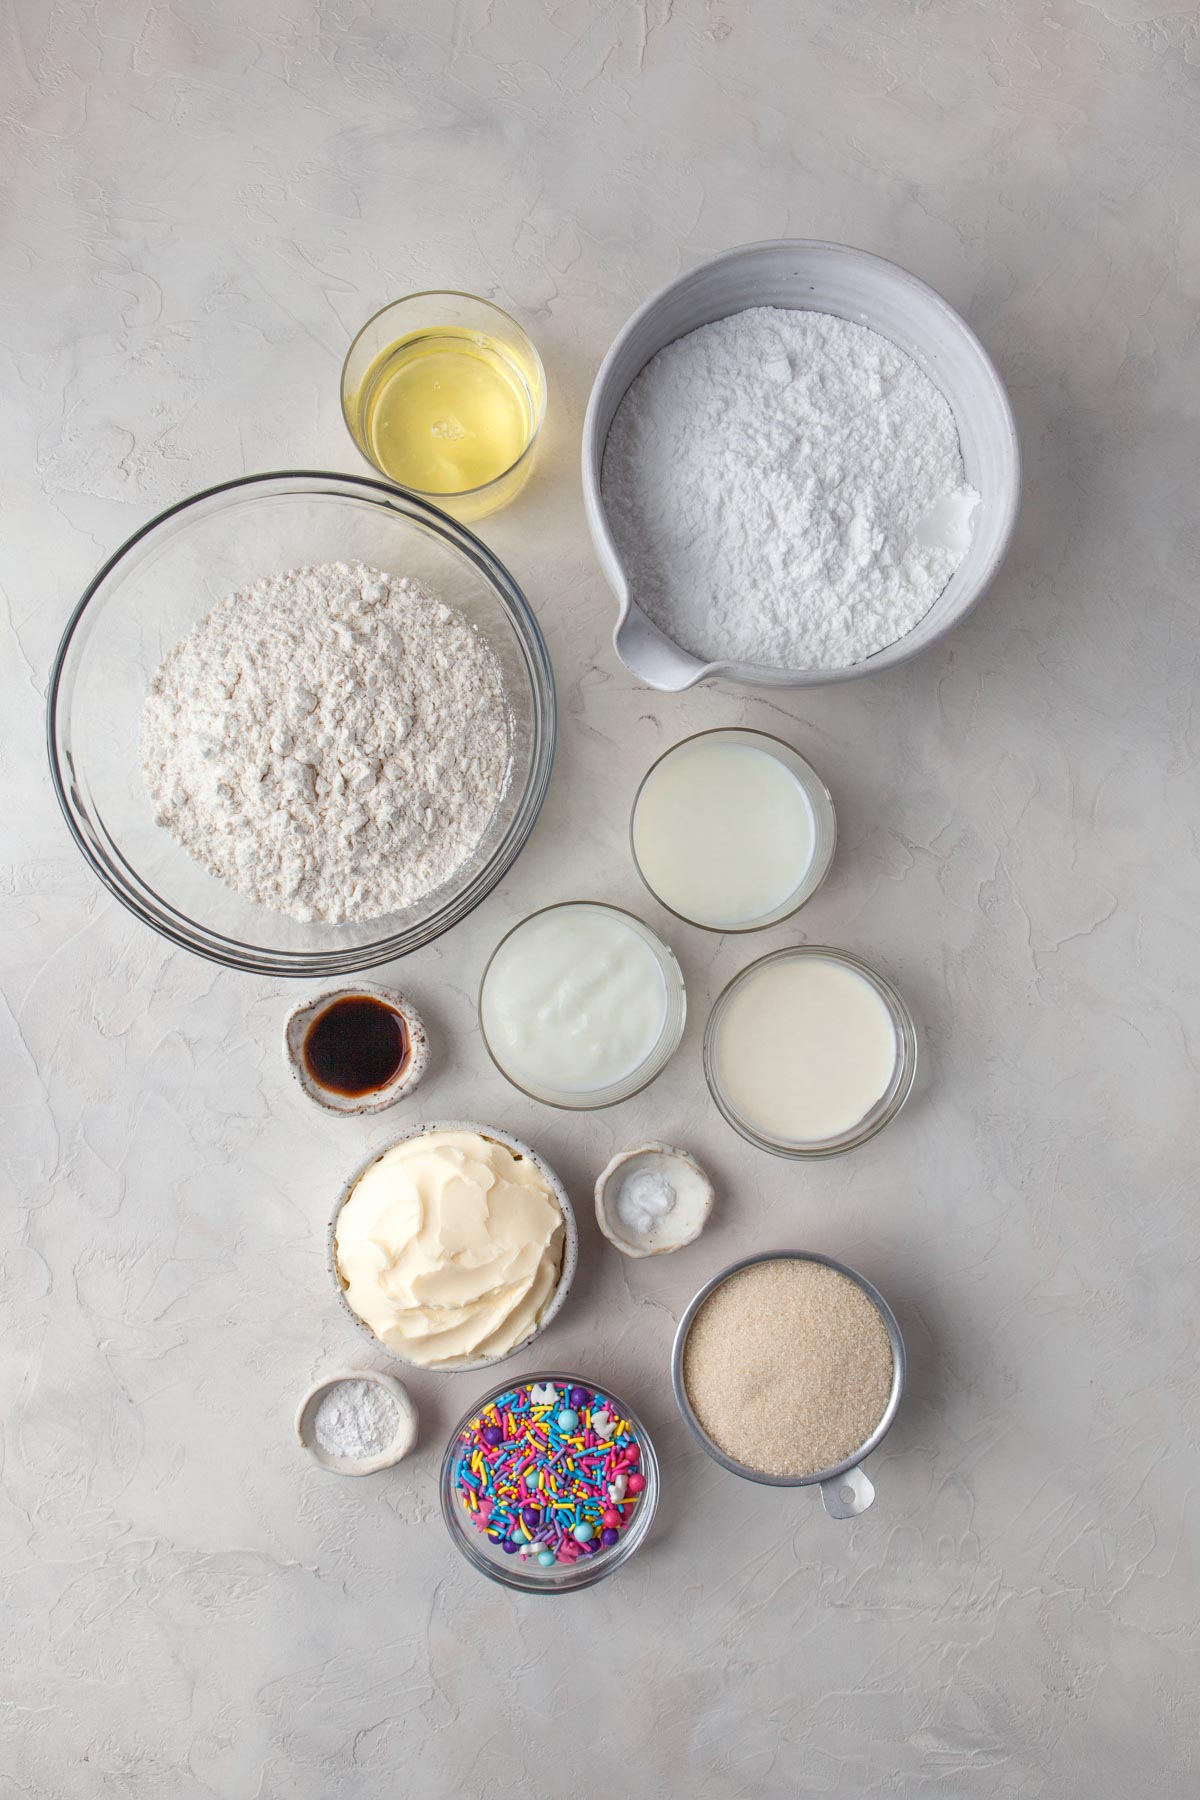 ingredients for funfetti sheet cake, including butter, flour, sprinkles, yogurt, vanilla extract